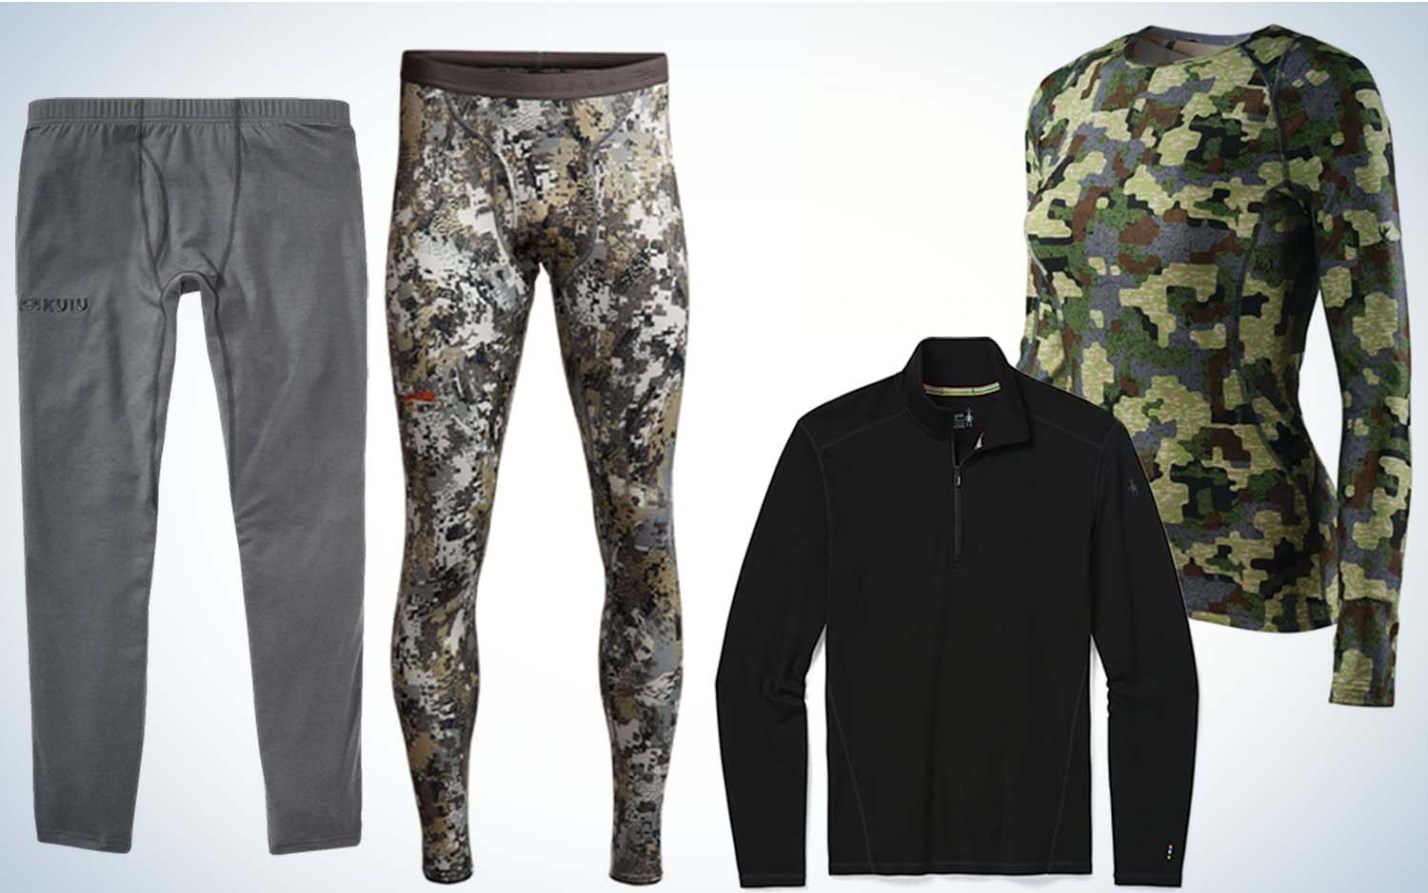 Four best base layers for hunting